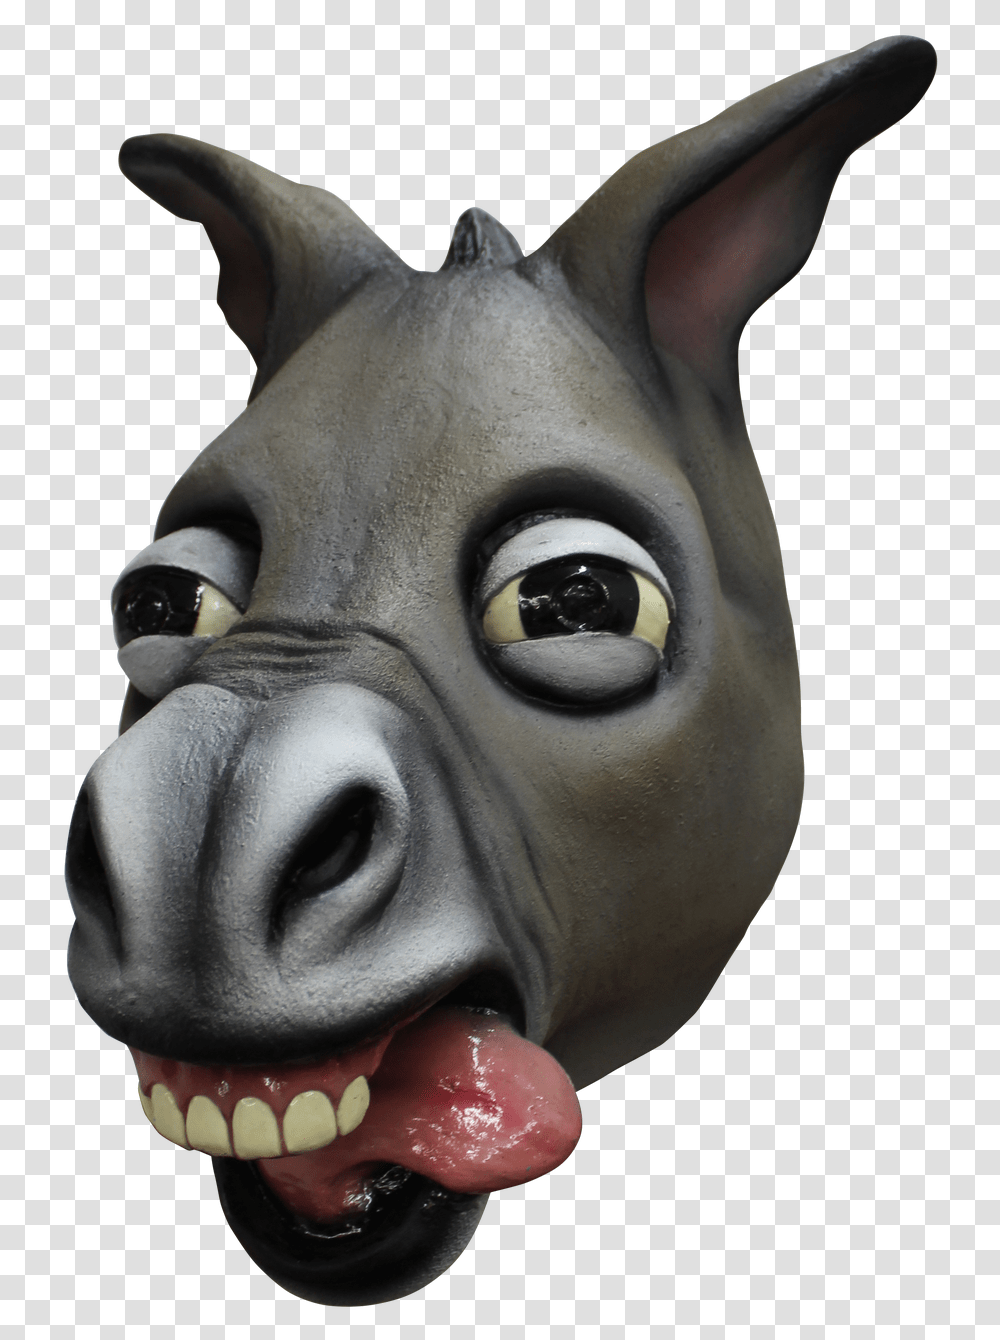 Donkey Mask, Mouth, Lip, Head, Teeth Transparent Png